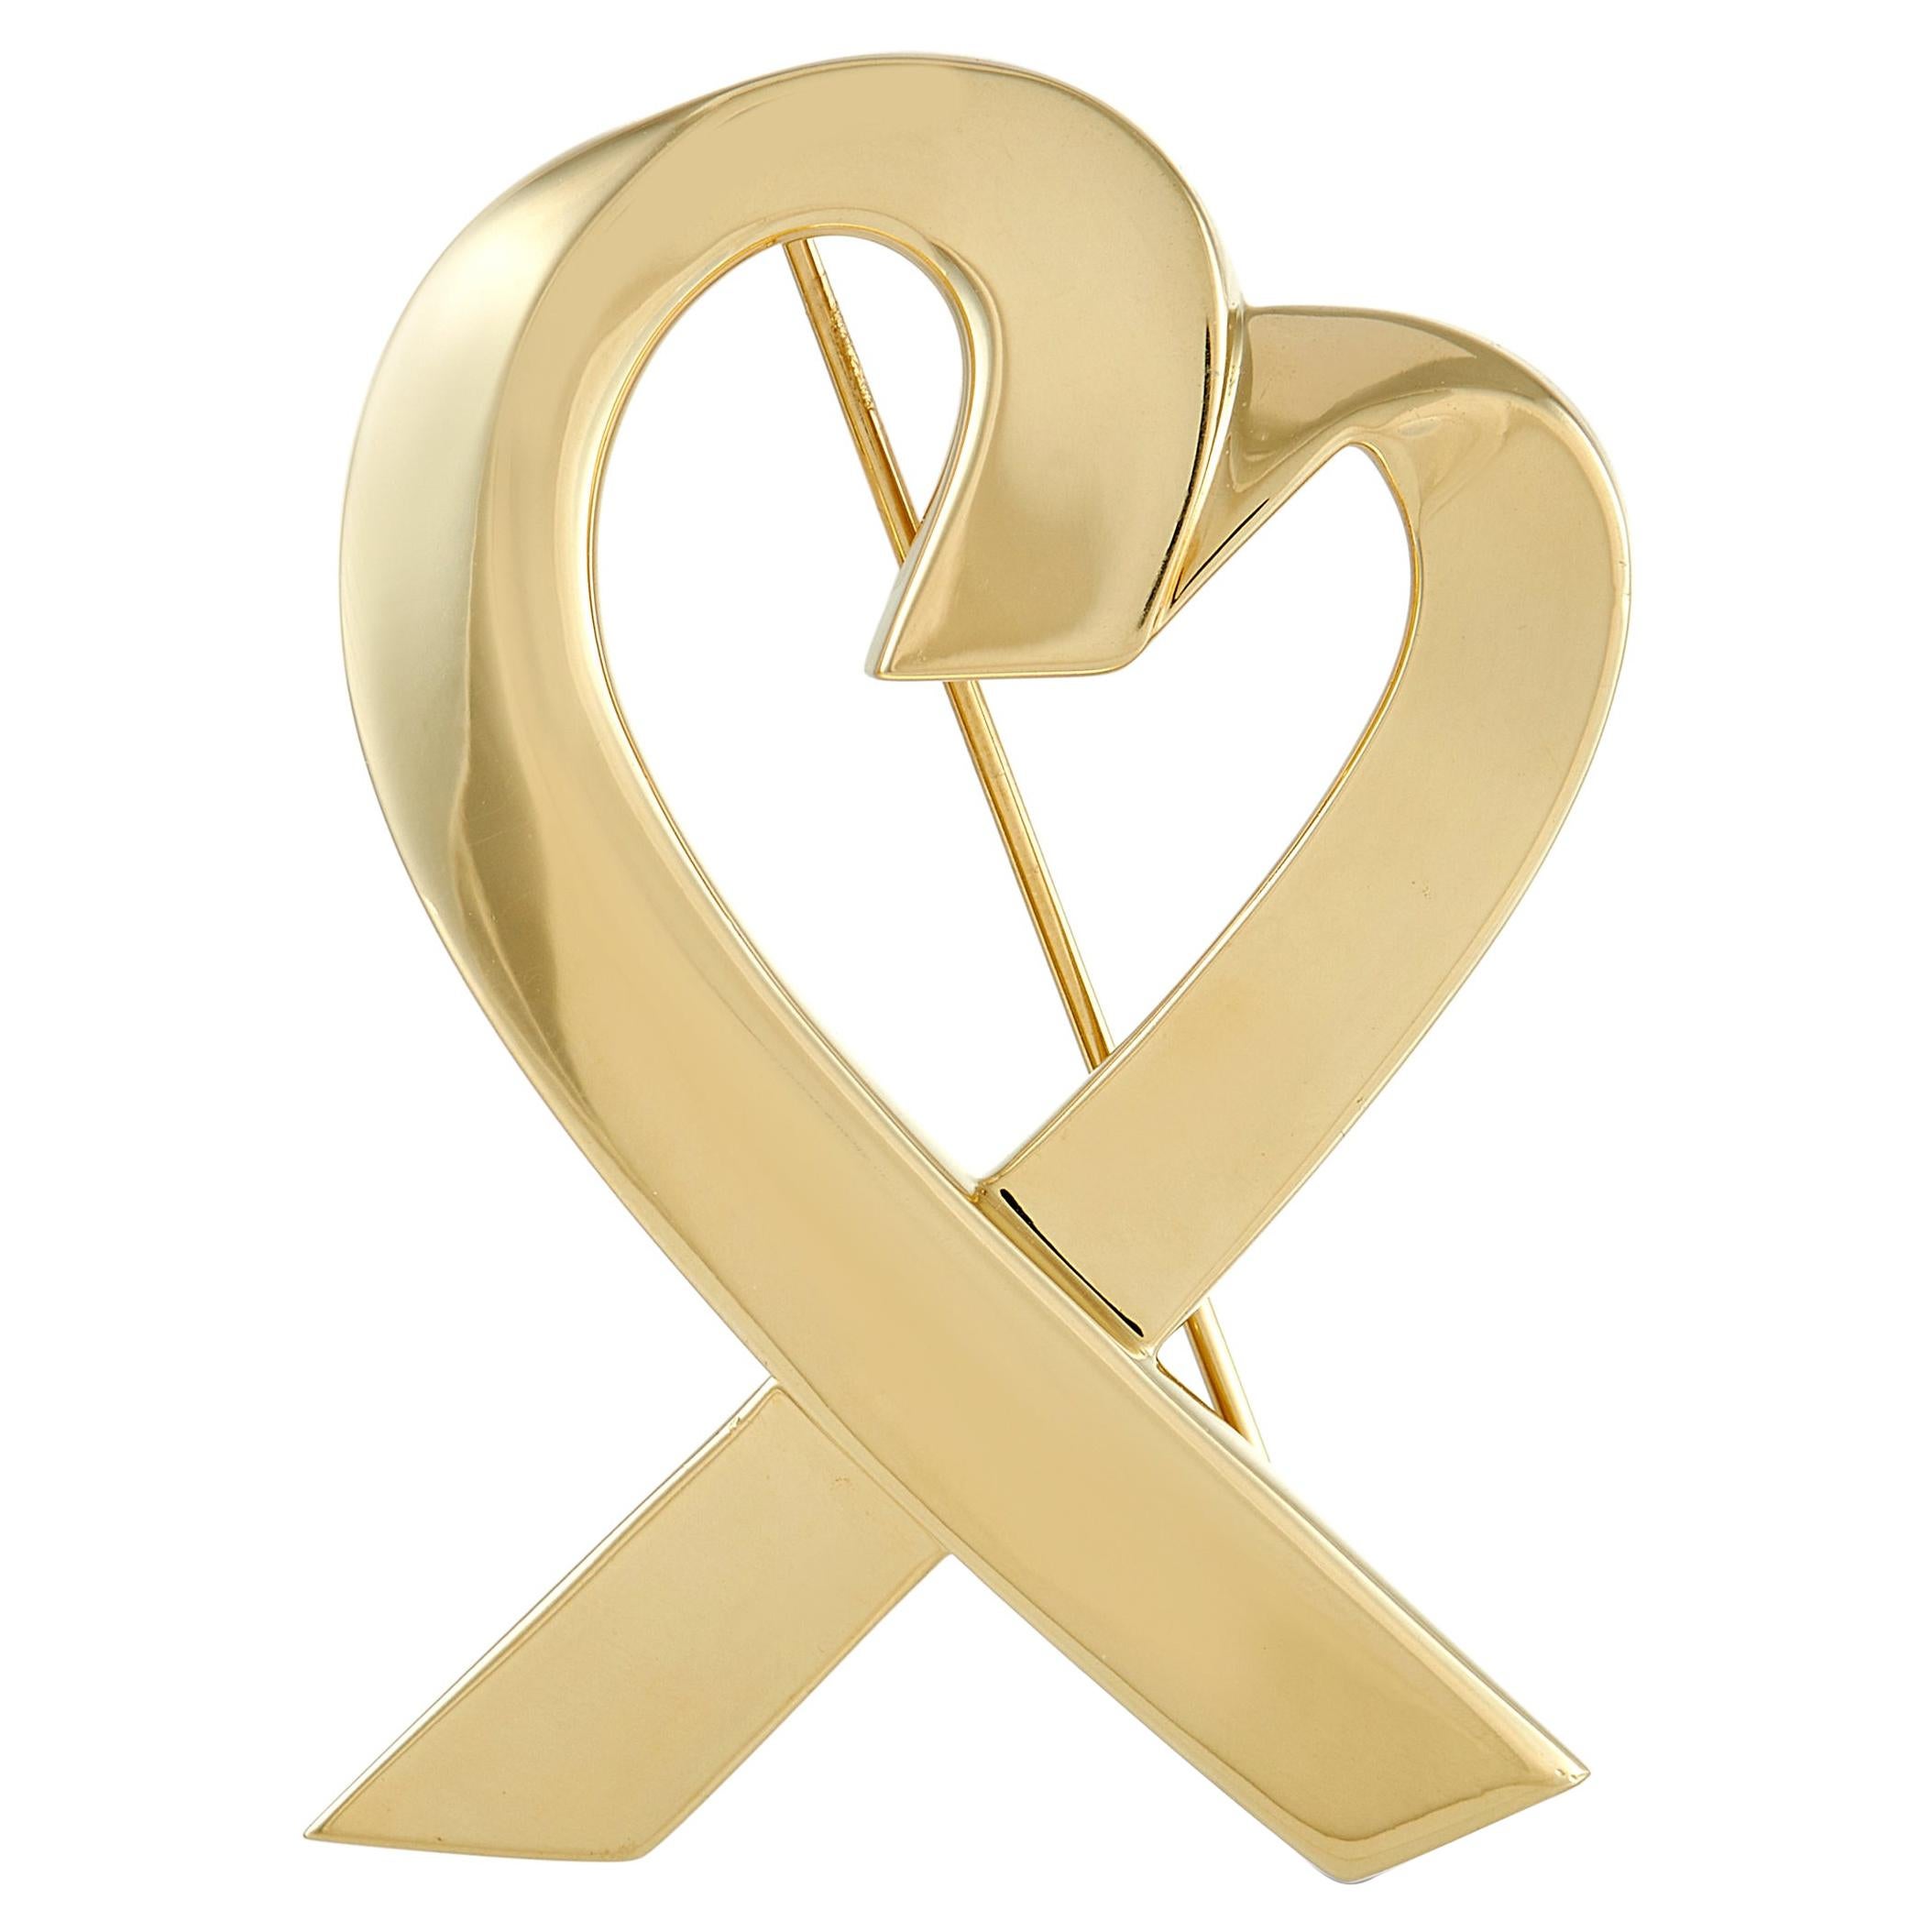 Tiffany & Co. 18K Yellow Gold Heart Brooch For Sale